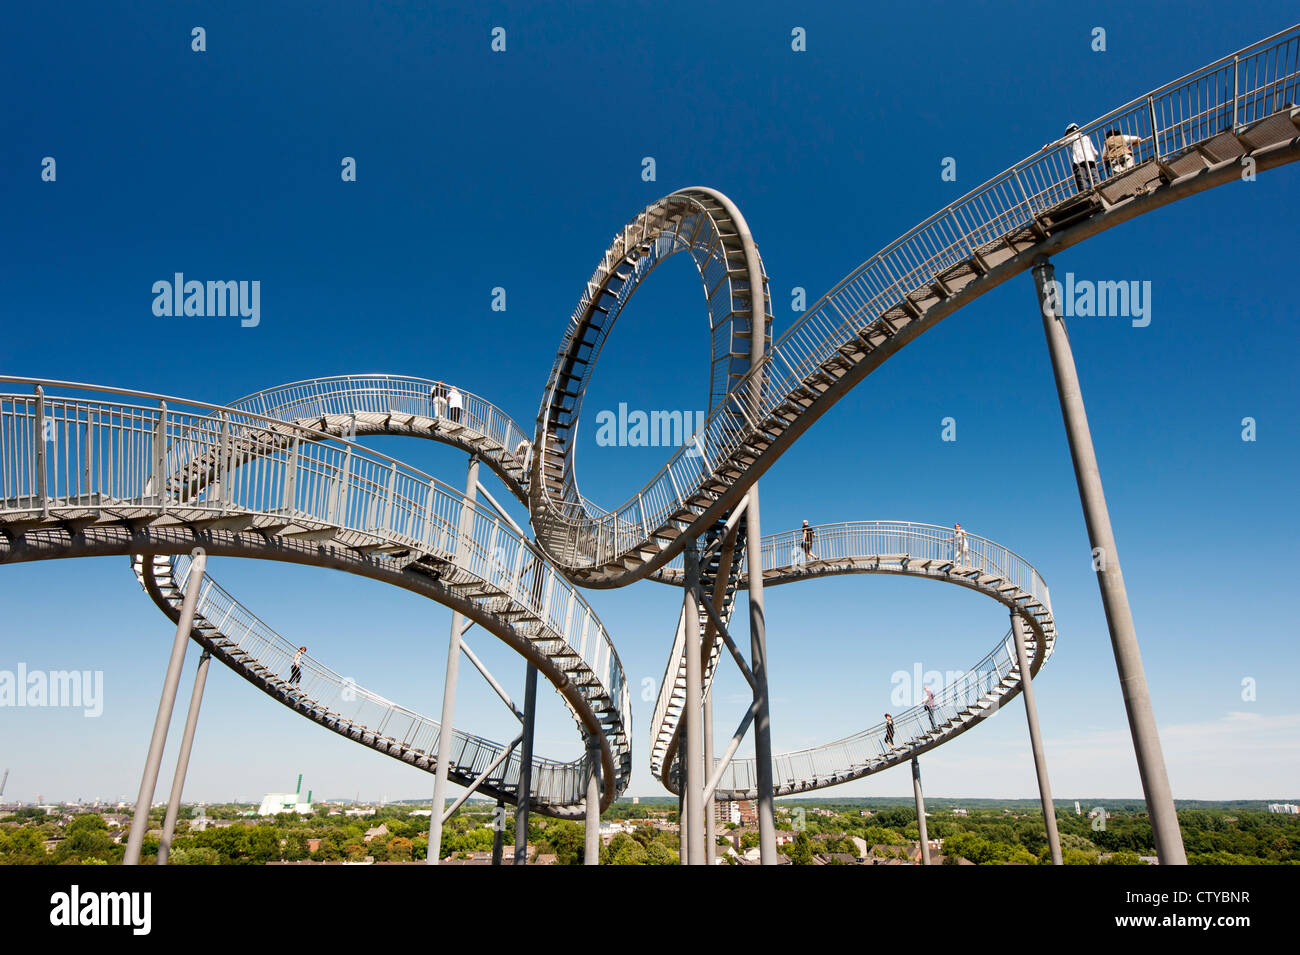 'Turtle and Tiger' pedestrian roller coaster sculpture on Magic Mountain in Duisburg Germany Stock Photo